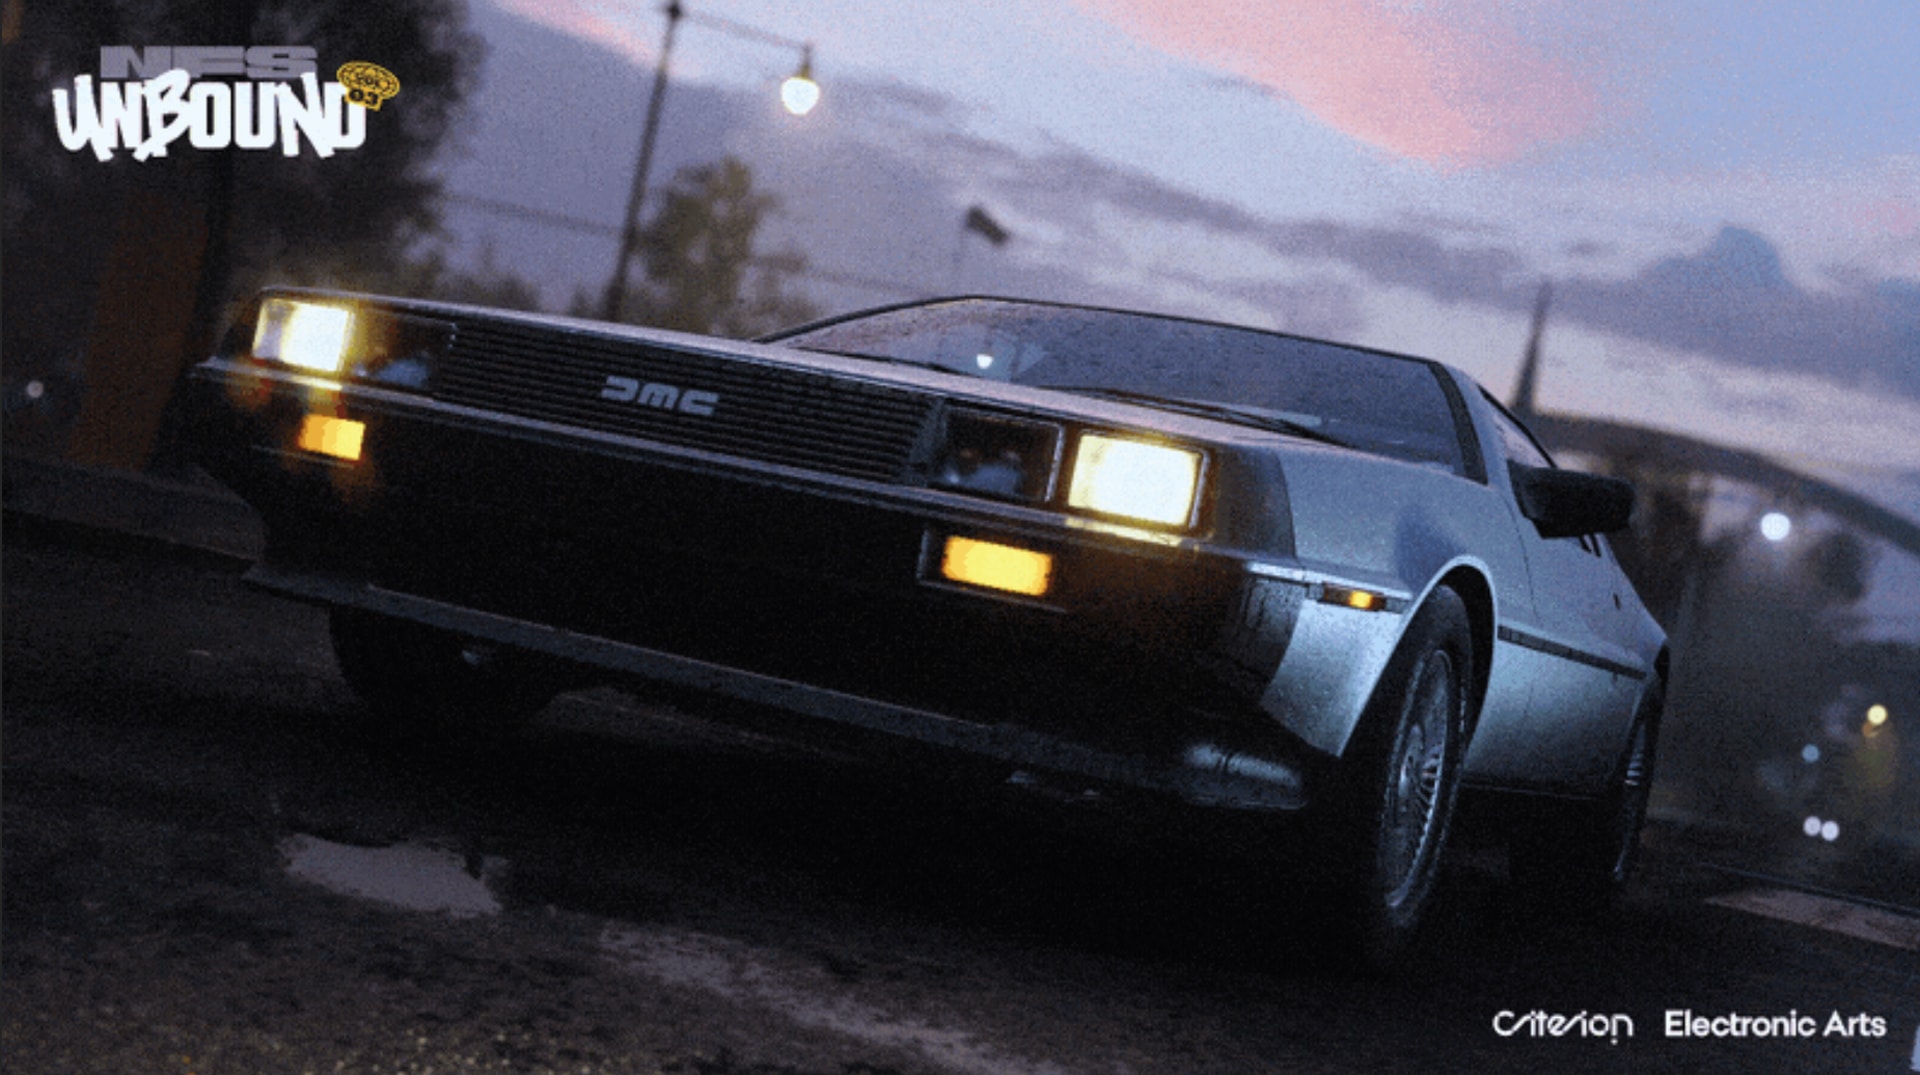 The Future of Need for Speed is in Doubt